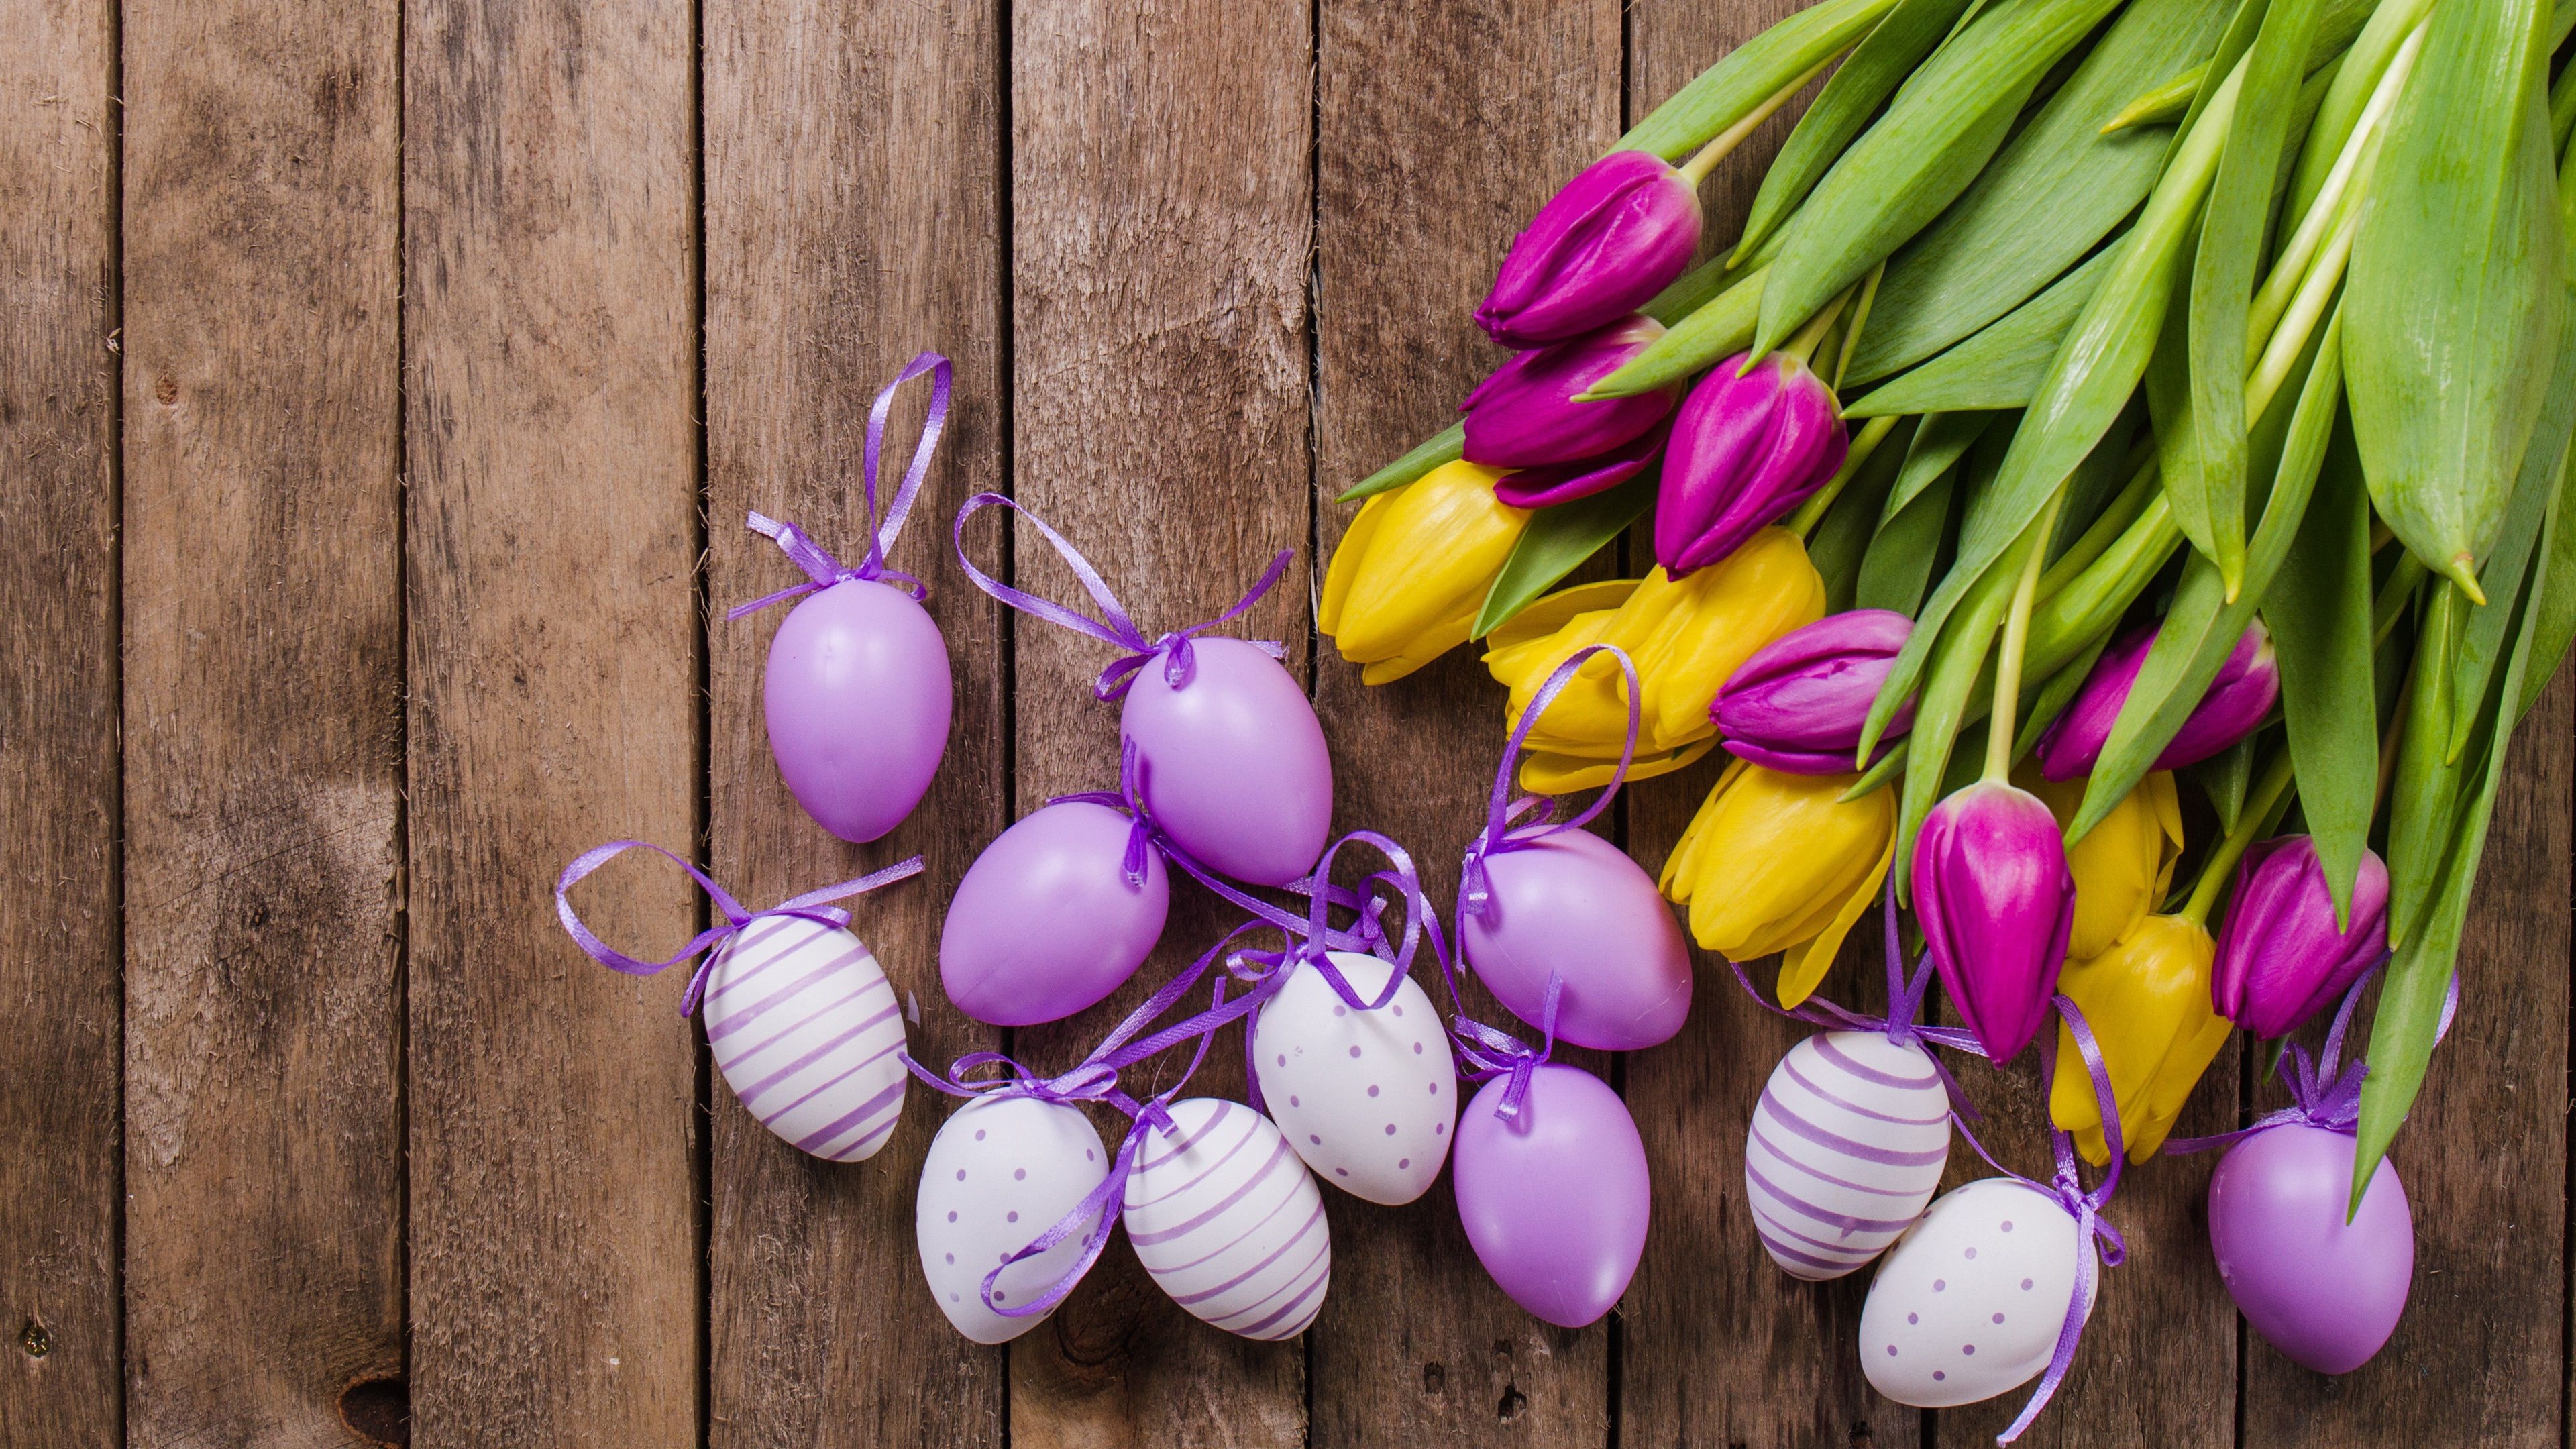 Wallpaper Yellow and purple tulips, eggs, Easter 3840x2160 UHD 4K Picture, Image